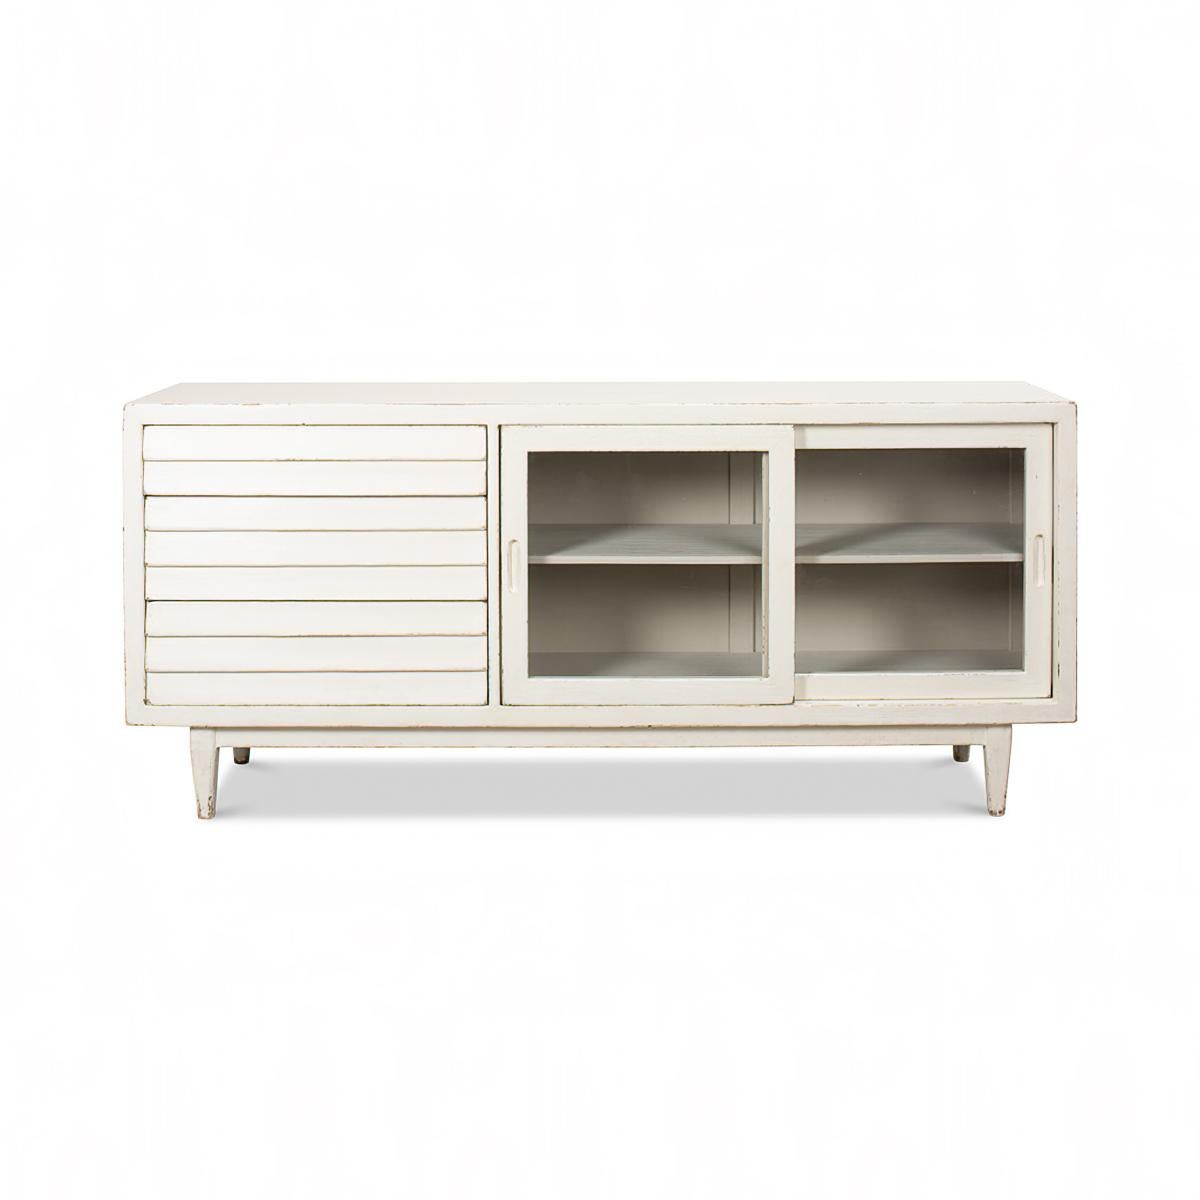 Antiqued White Painted Sideboard, made of pine in an antiqued white painted finish. With three graduated drawers, and two glass front sliding doors. 

Dimensions: 72